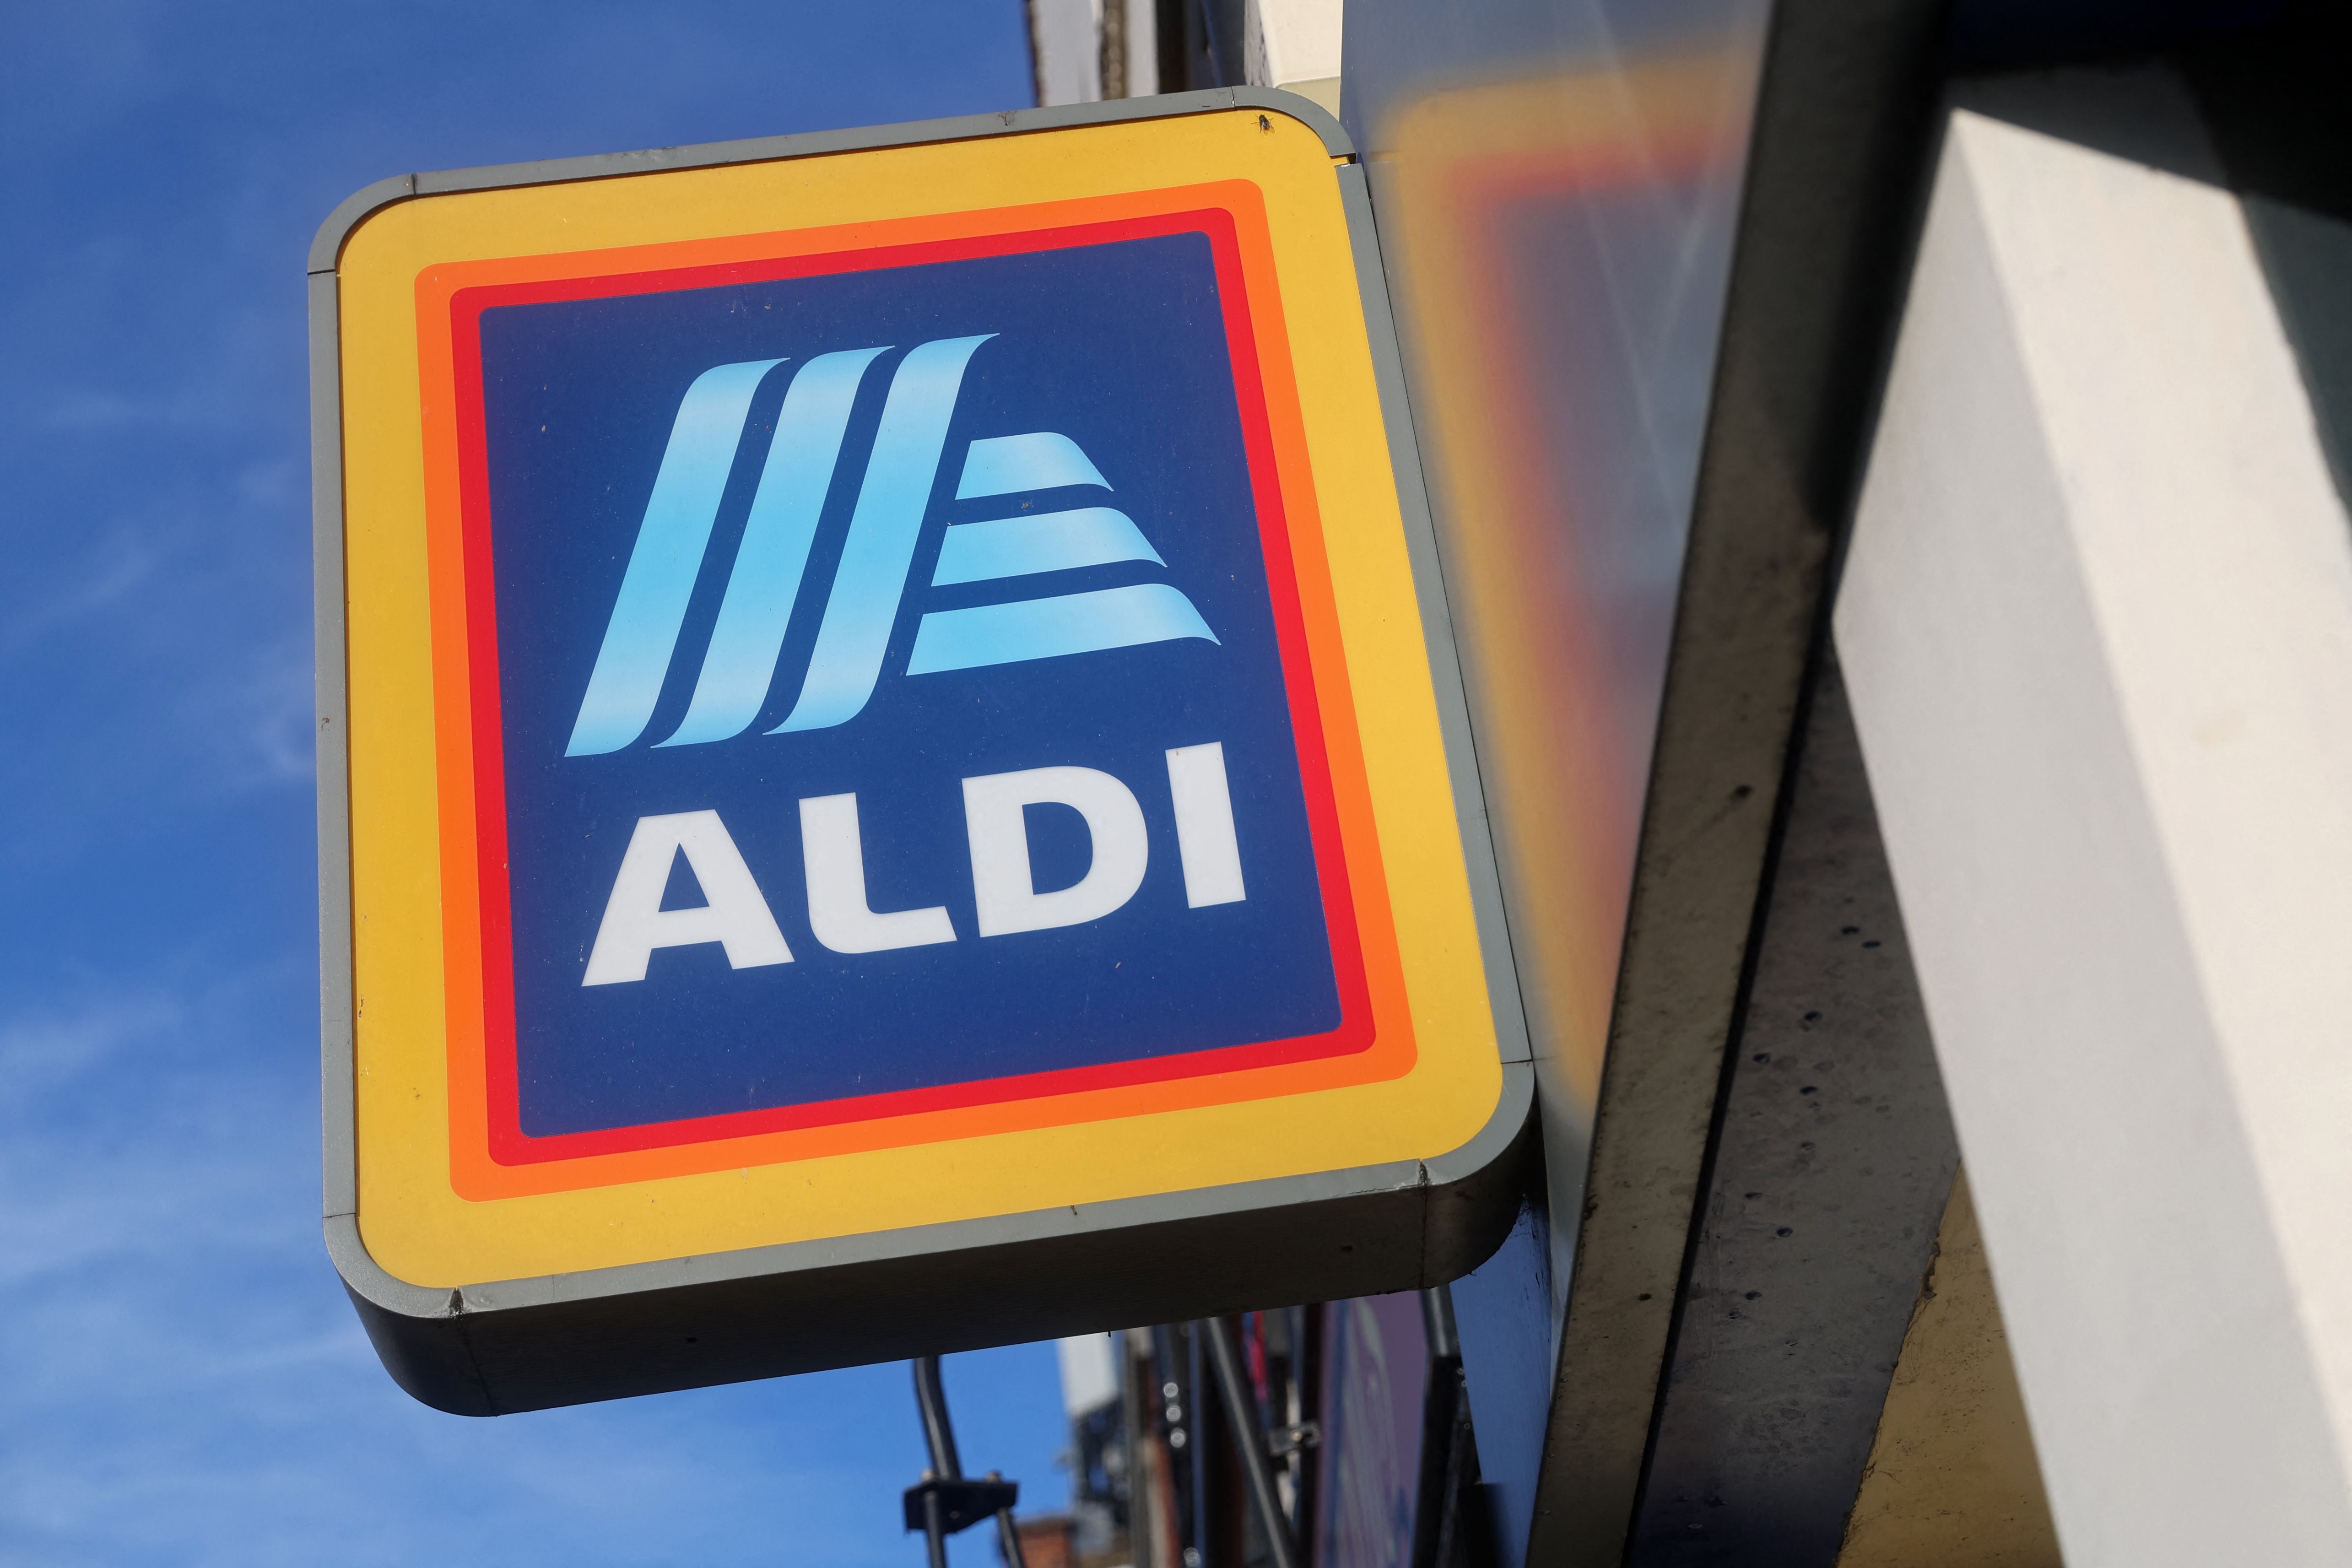 Aldi is among one of several supermarket chains that are recalling cream cheese products after a potential salmonella contamination